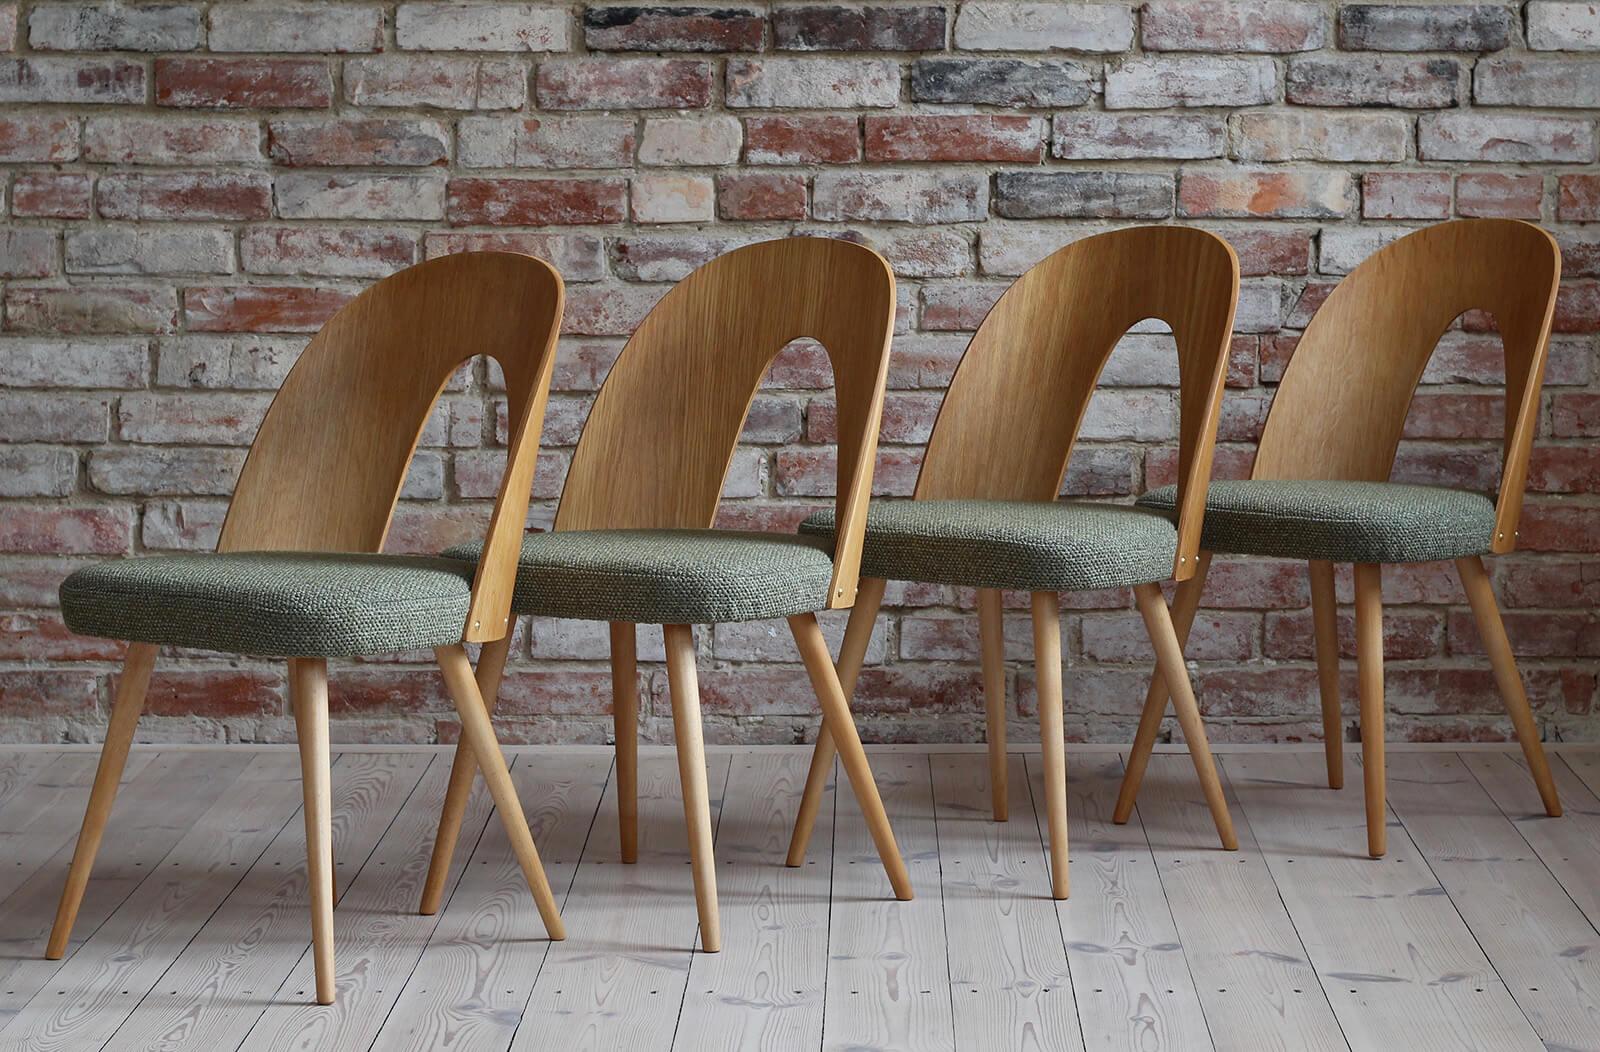 This set of ten vintage dining chairs was designed by Czech designer Antonin Šuman in the 1960s. The chairs have been completely restored finished with high-quality oil that gave them beautiful and natural finish. This set is reupholstered with